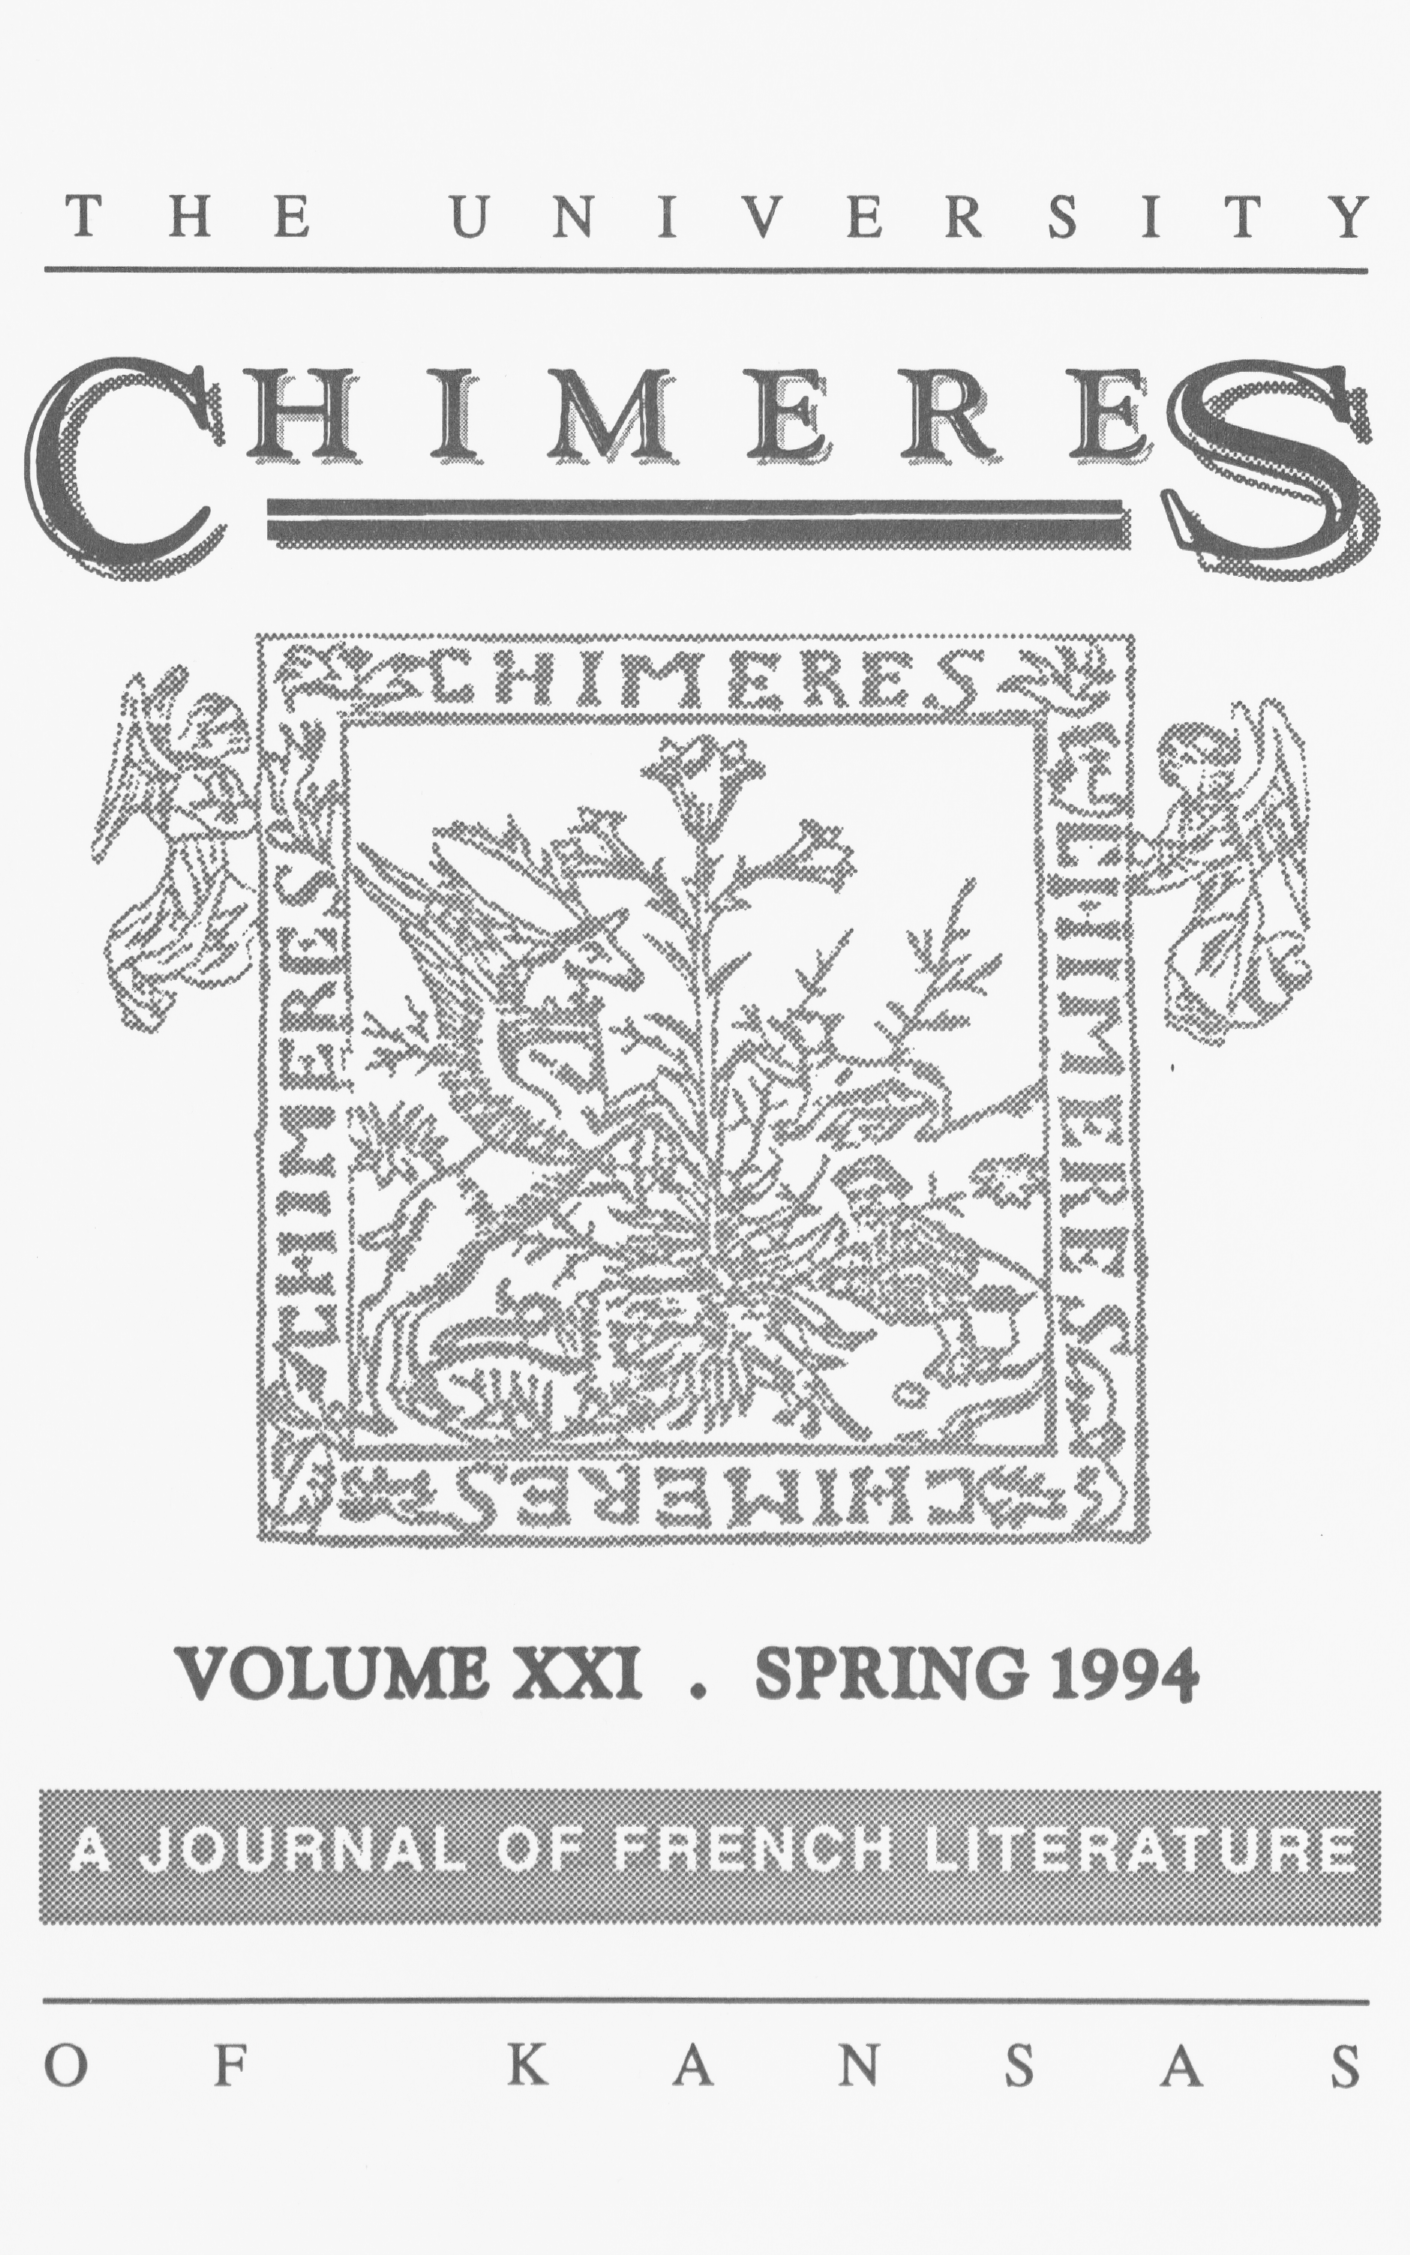 Cover for Chimères, Vol. 21.1, Spring 1984